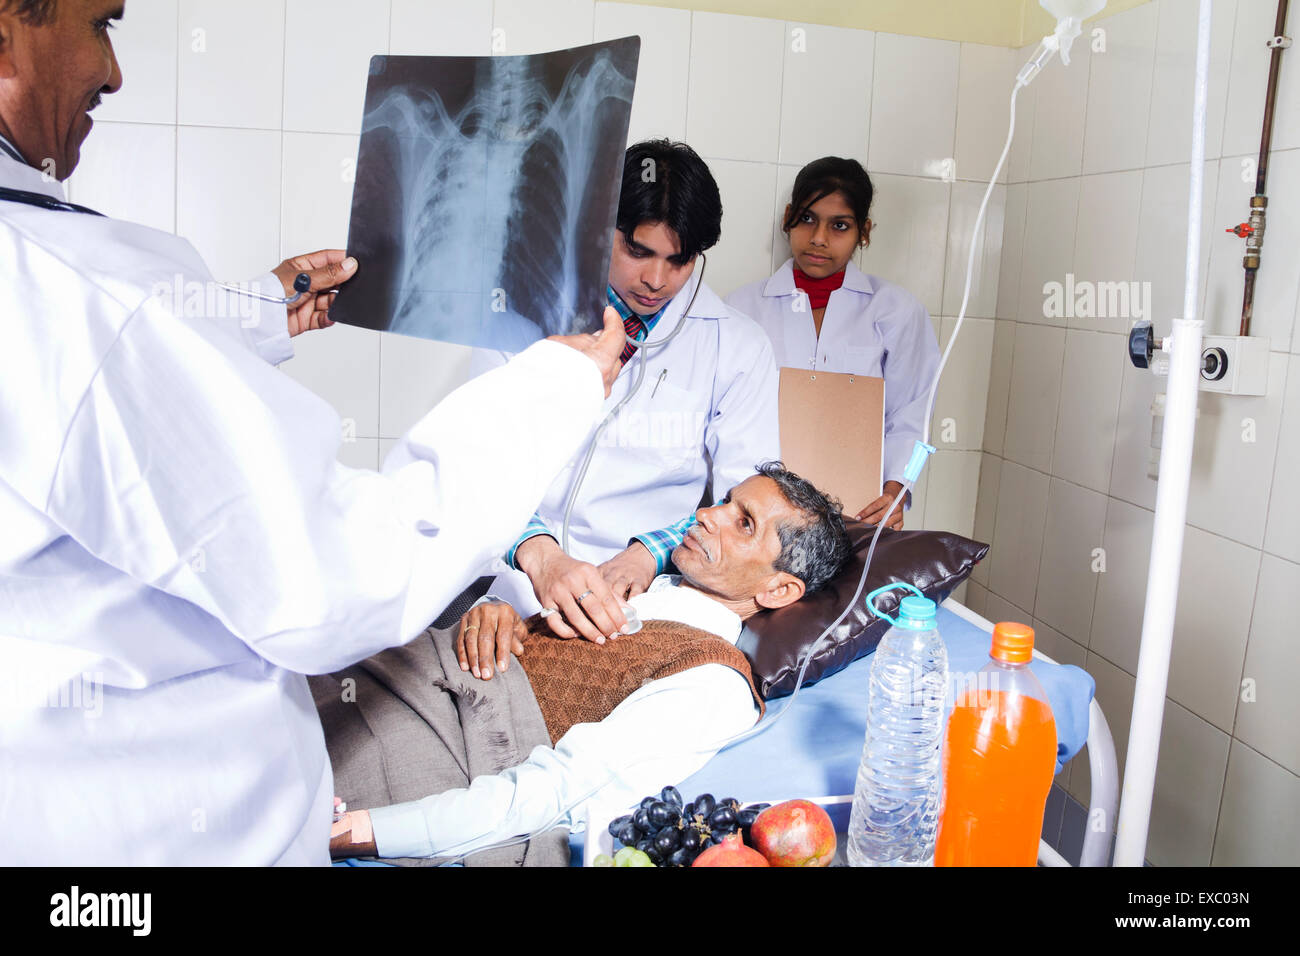 indian doctor hospital Patient  X-Ray report Checking Stock Photo